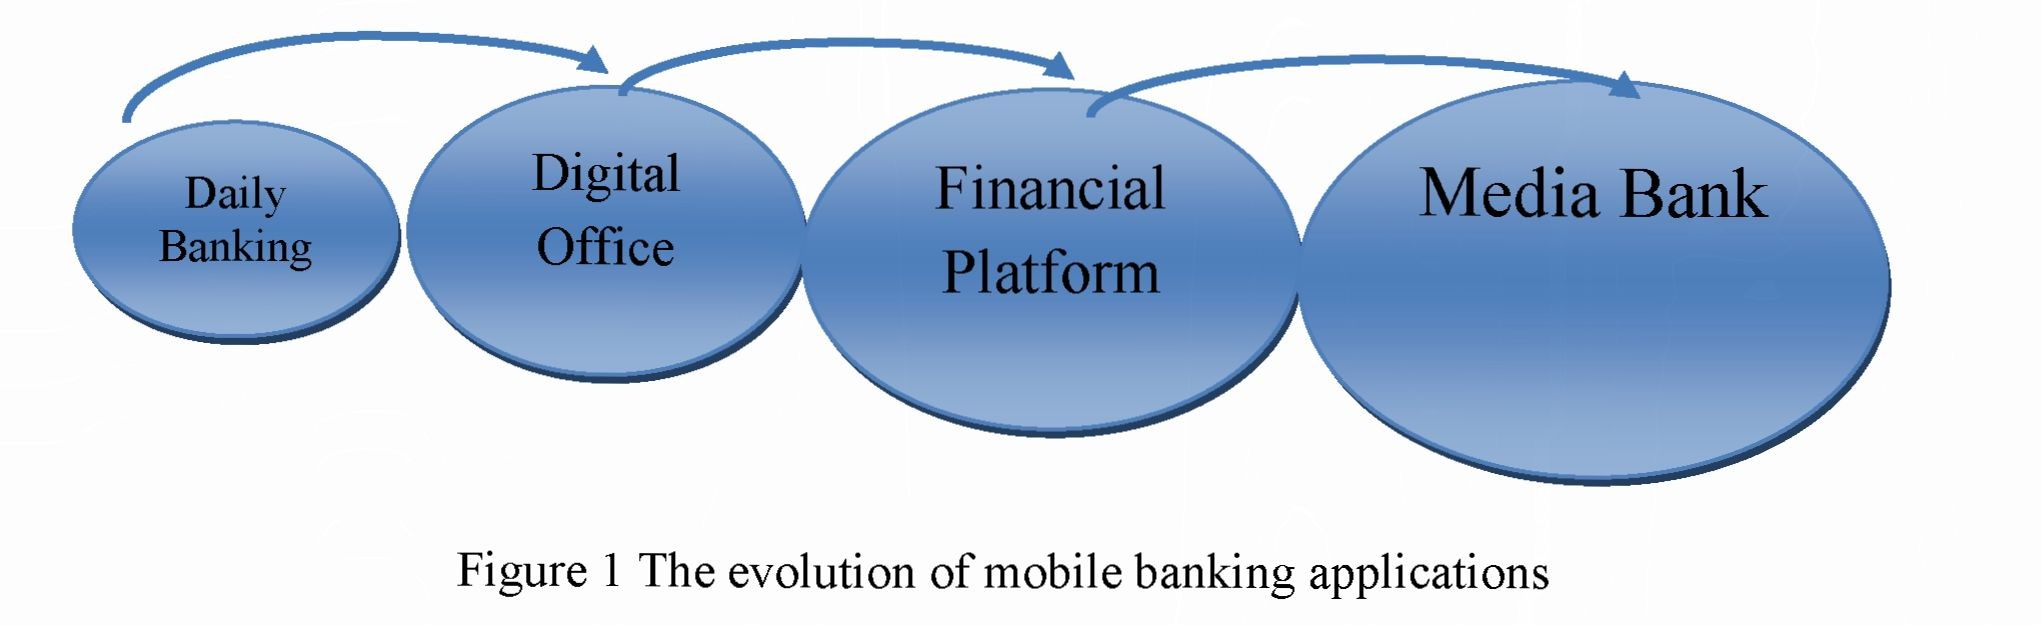 The impact of information technology in banking sector